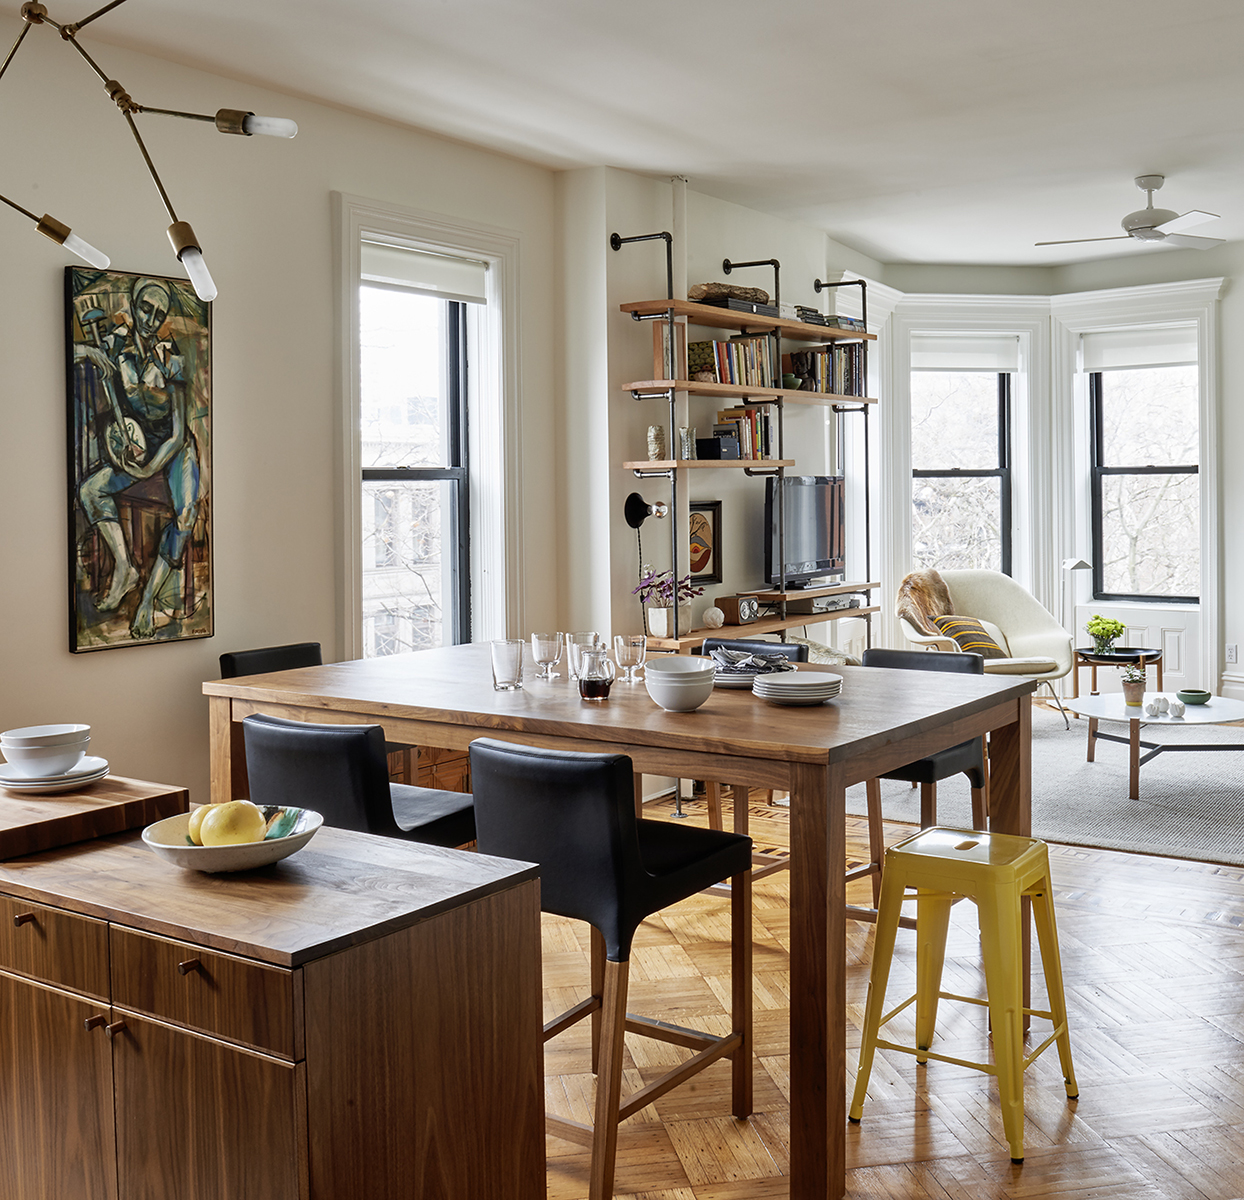 Small Space Project
Calderwood/Darter 
650 Sq Foot Apt.
Park Slope Brooklyn
 : Interior Projects : MICHEL ARNAUD PHOTOGRAPHY